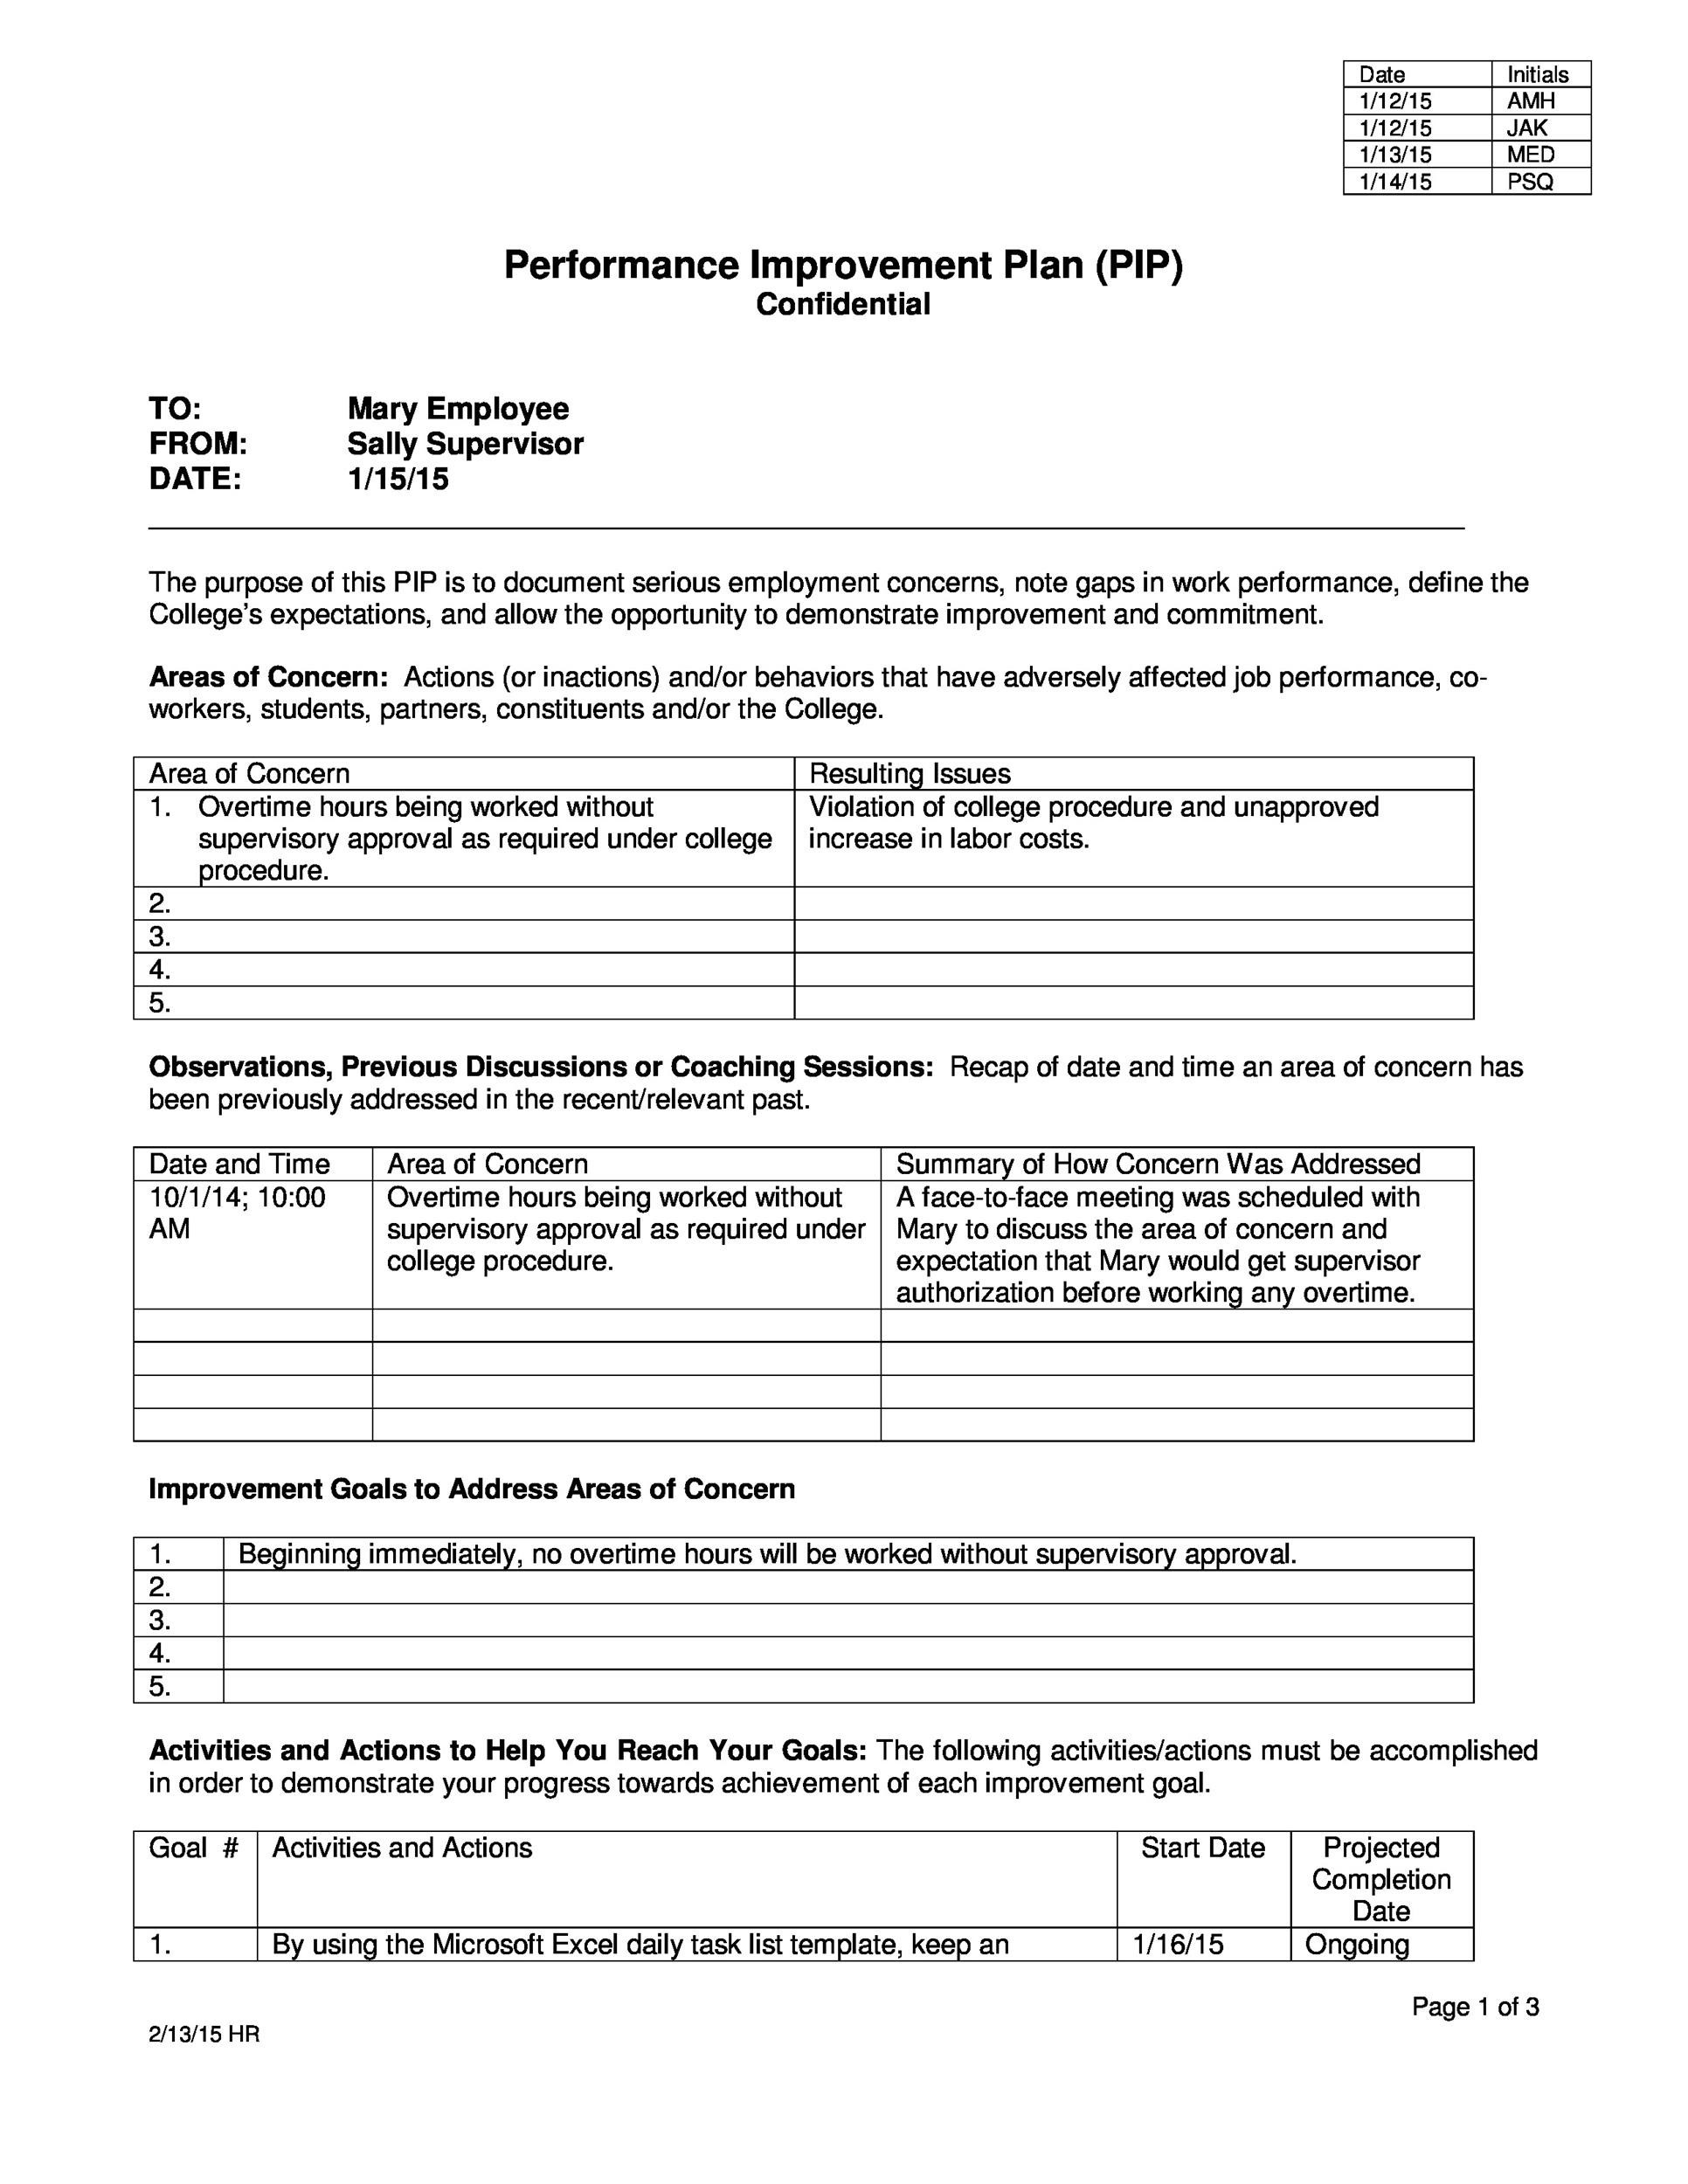 40 Performance Improvement Plan Templates And Examples 8867